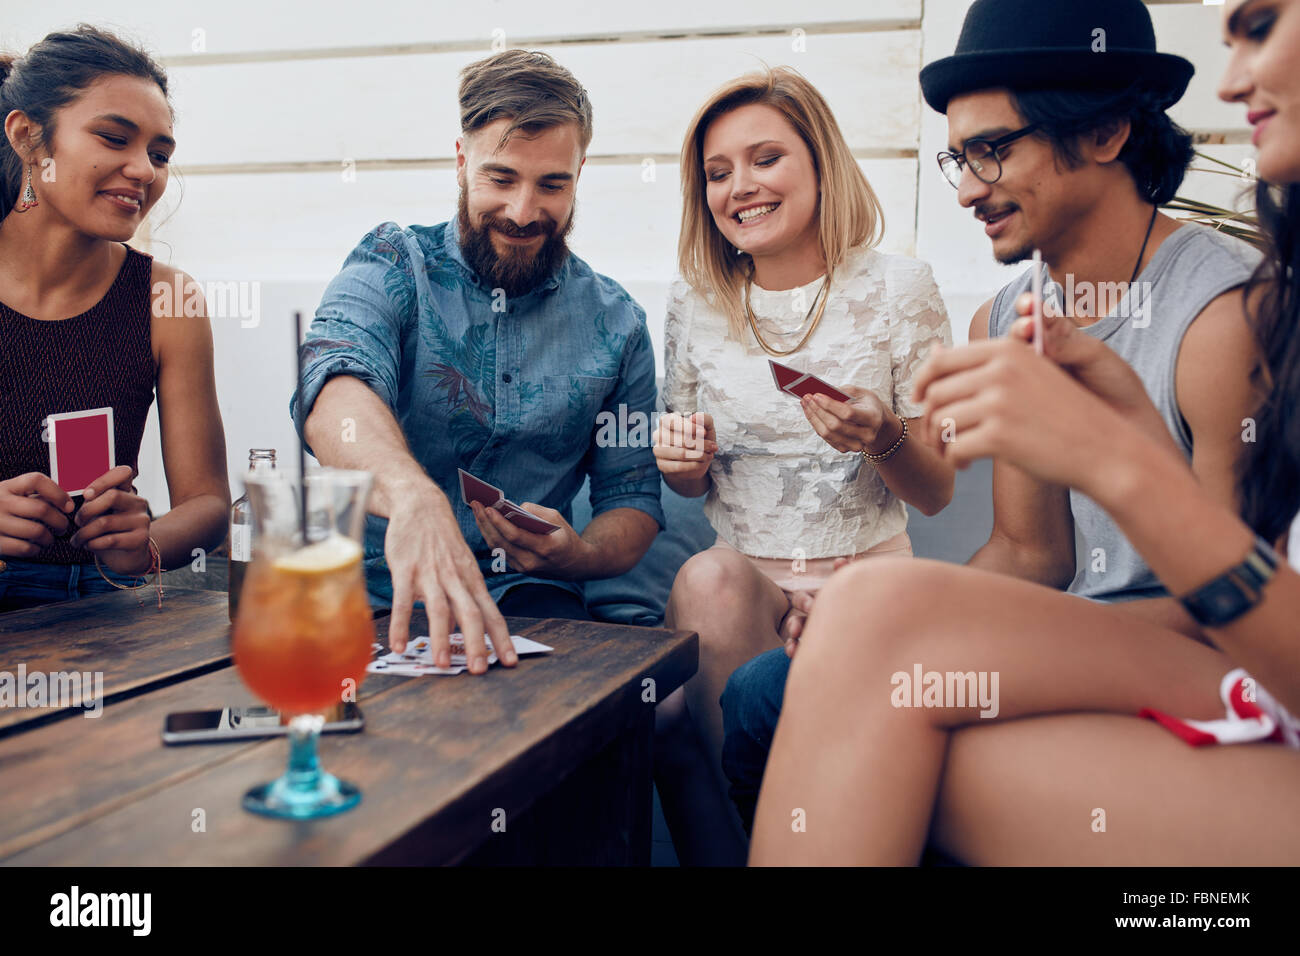 Group of friends relaxing and playing cards together. Young people hanging out together around a table during a party playing a Stock Photo